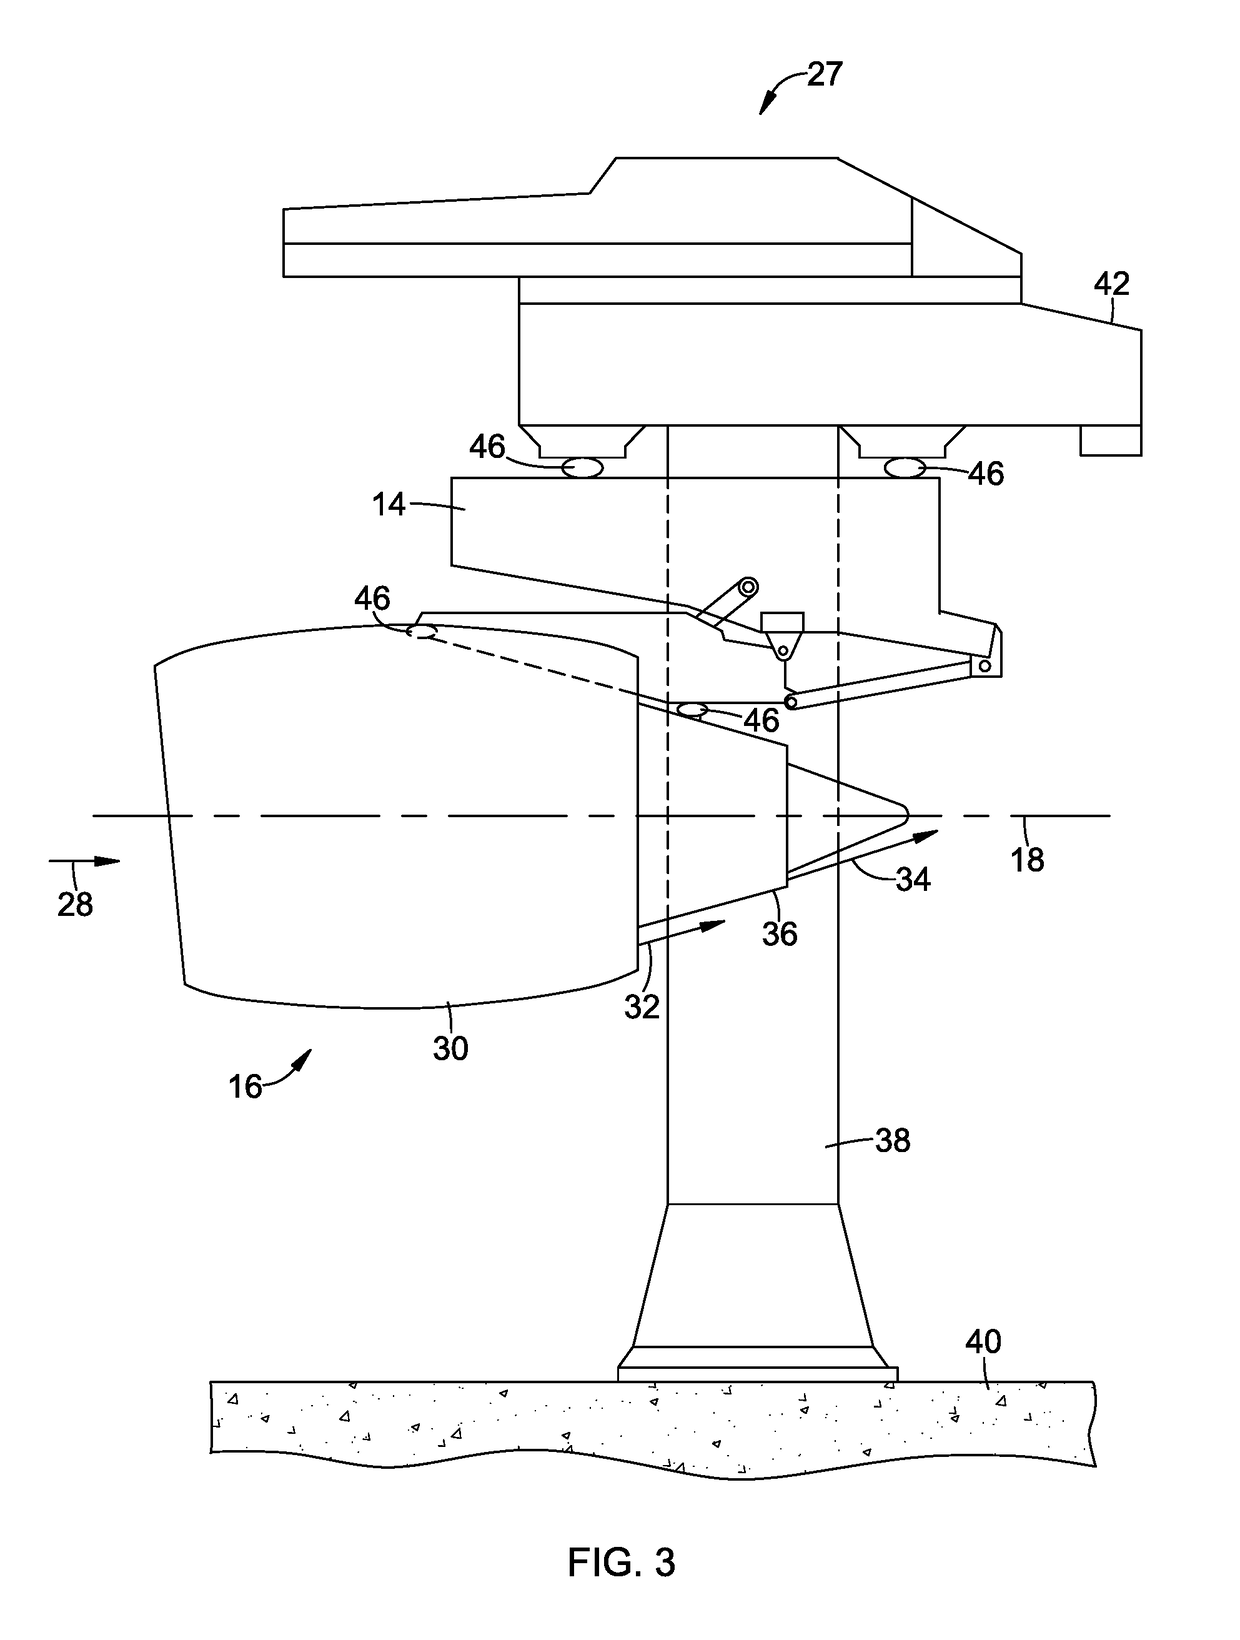 Engine test stand mounting apparatus and method